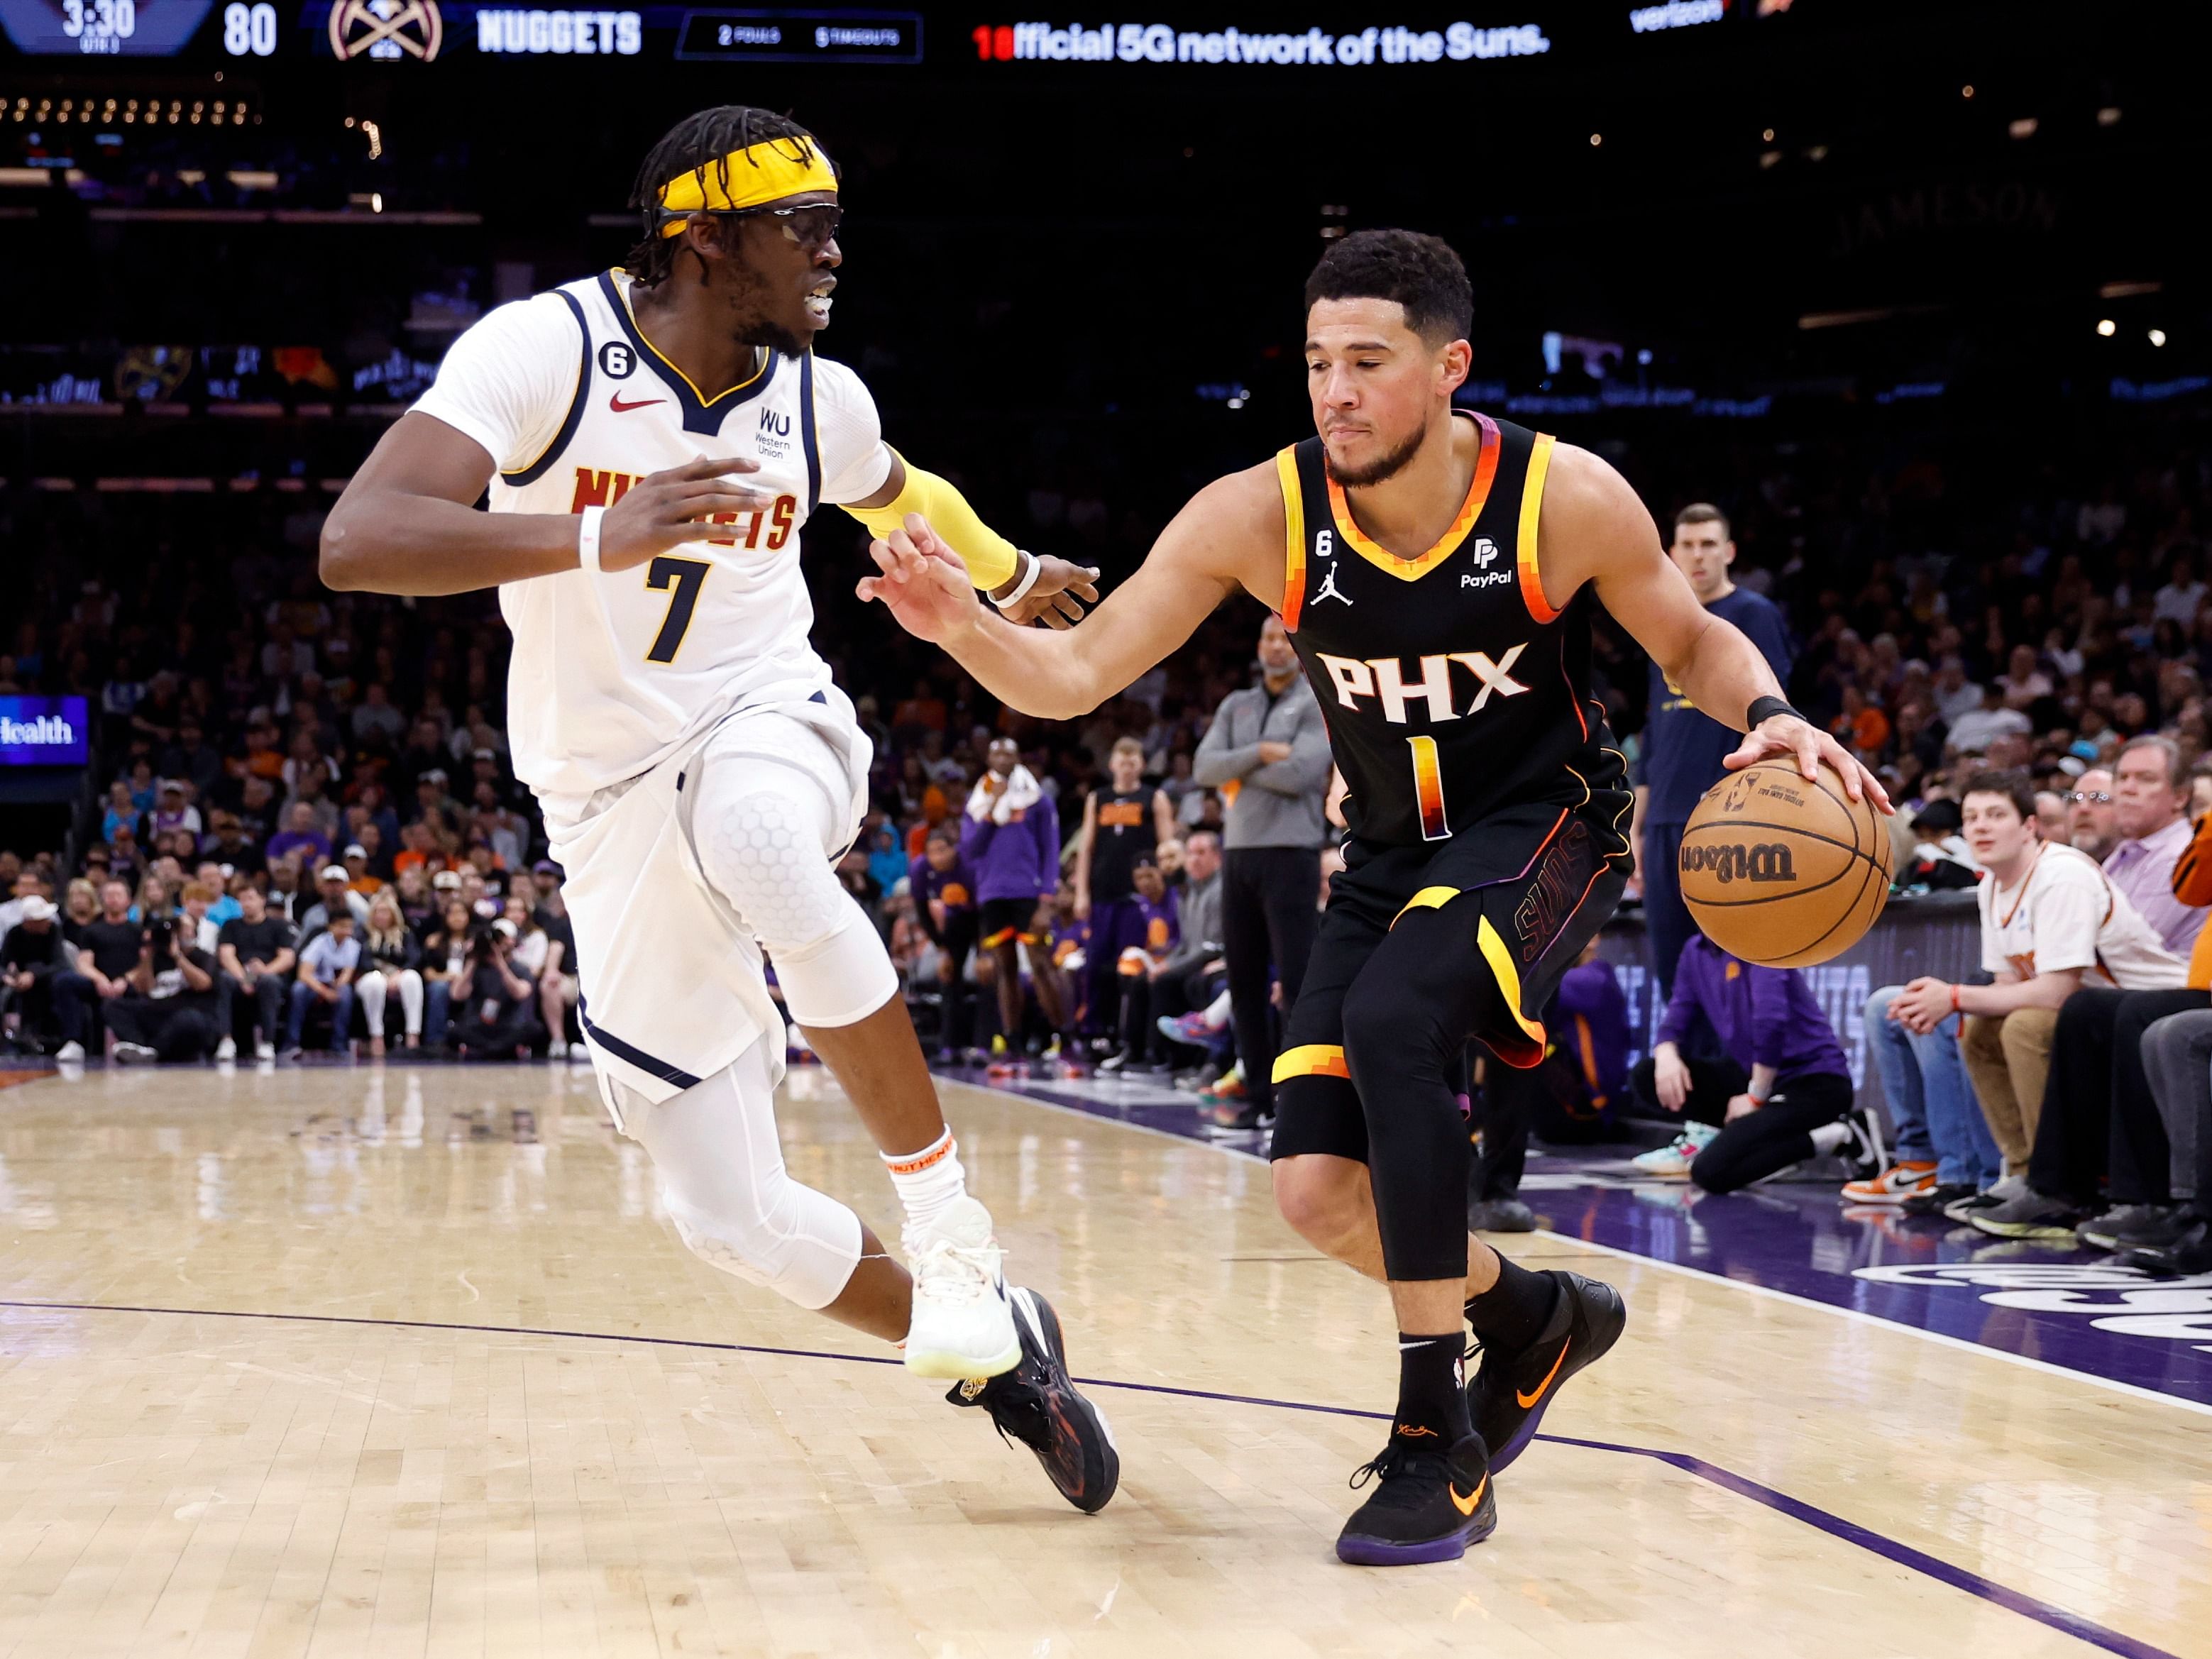 Reggie Jackson of the Denver Nuggets and Devin Booker of the Phoenix Suns